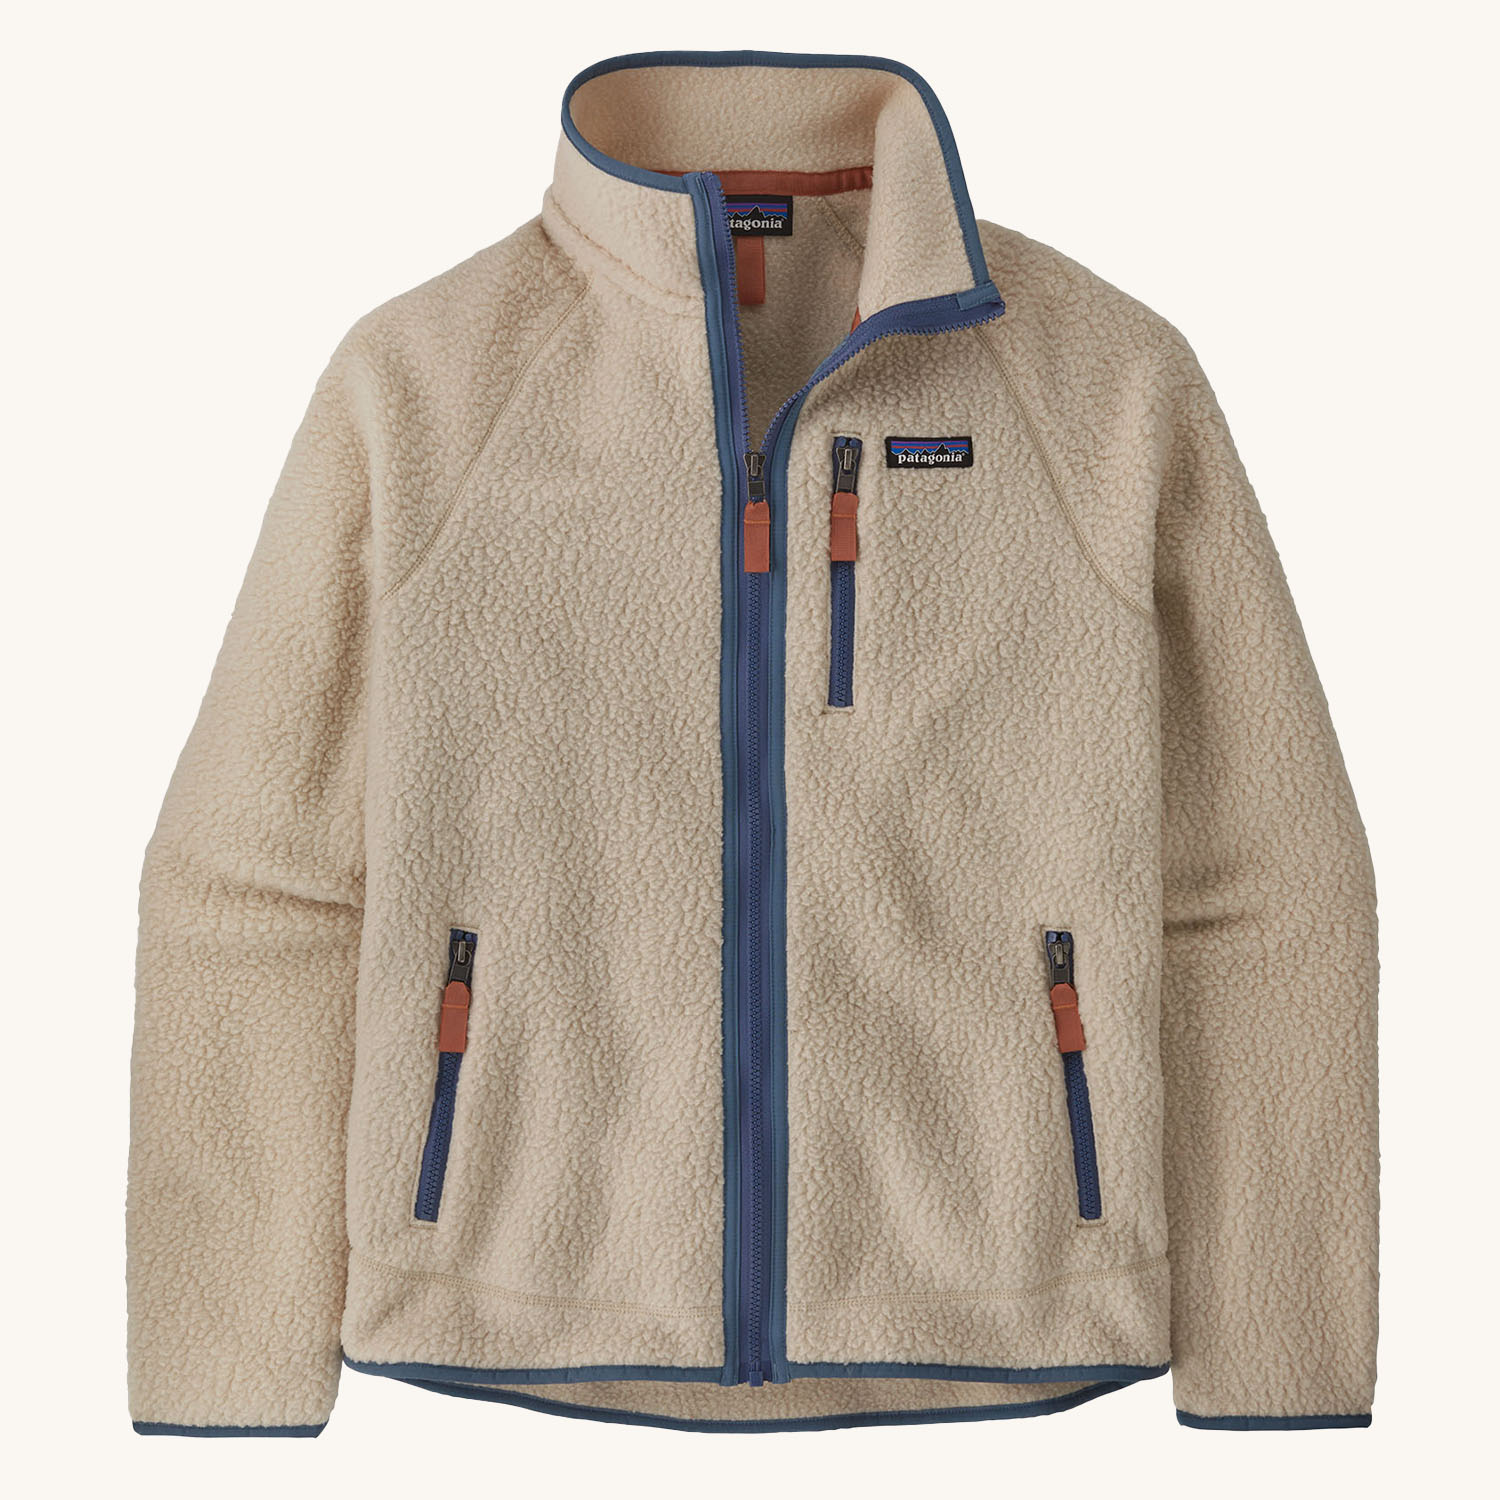 Patagonia Ethical Clothing Facts, Rating, Goals | Panaprium